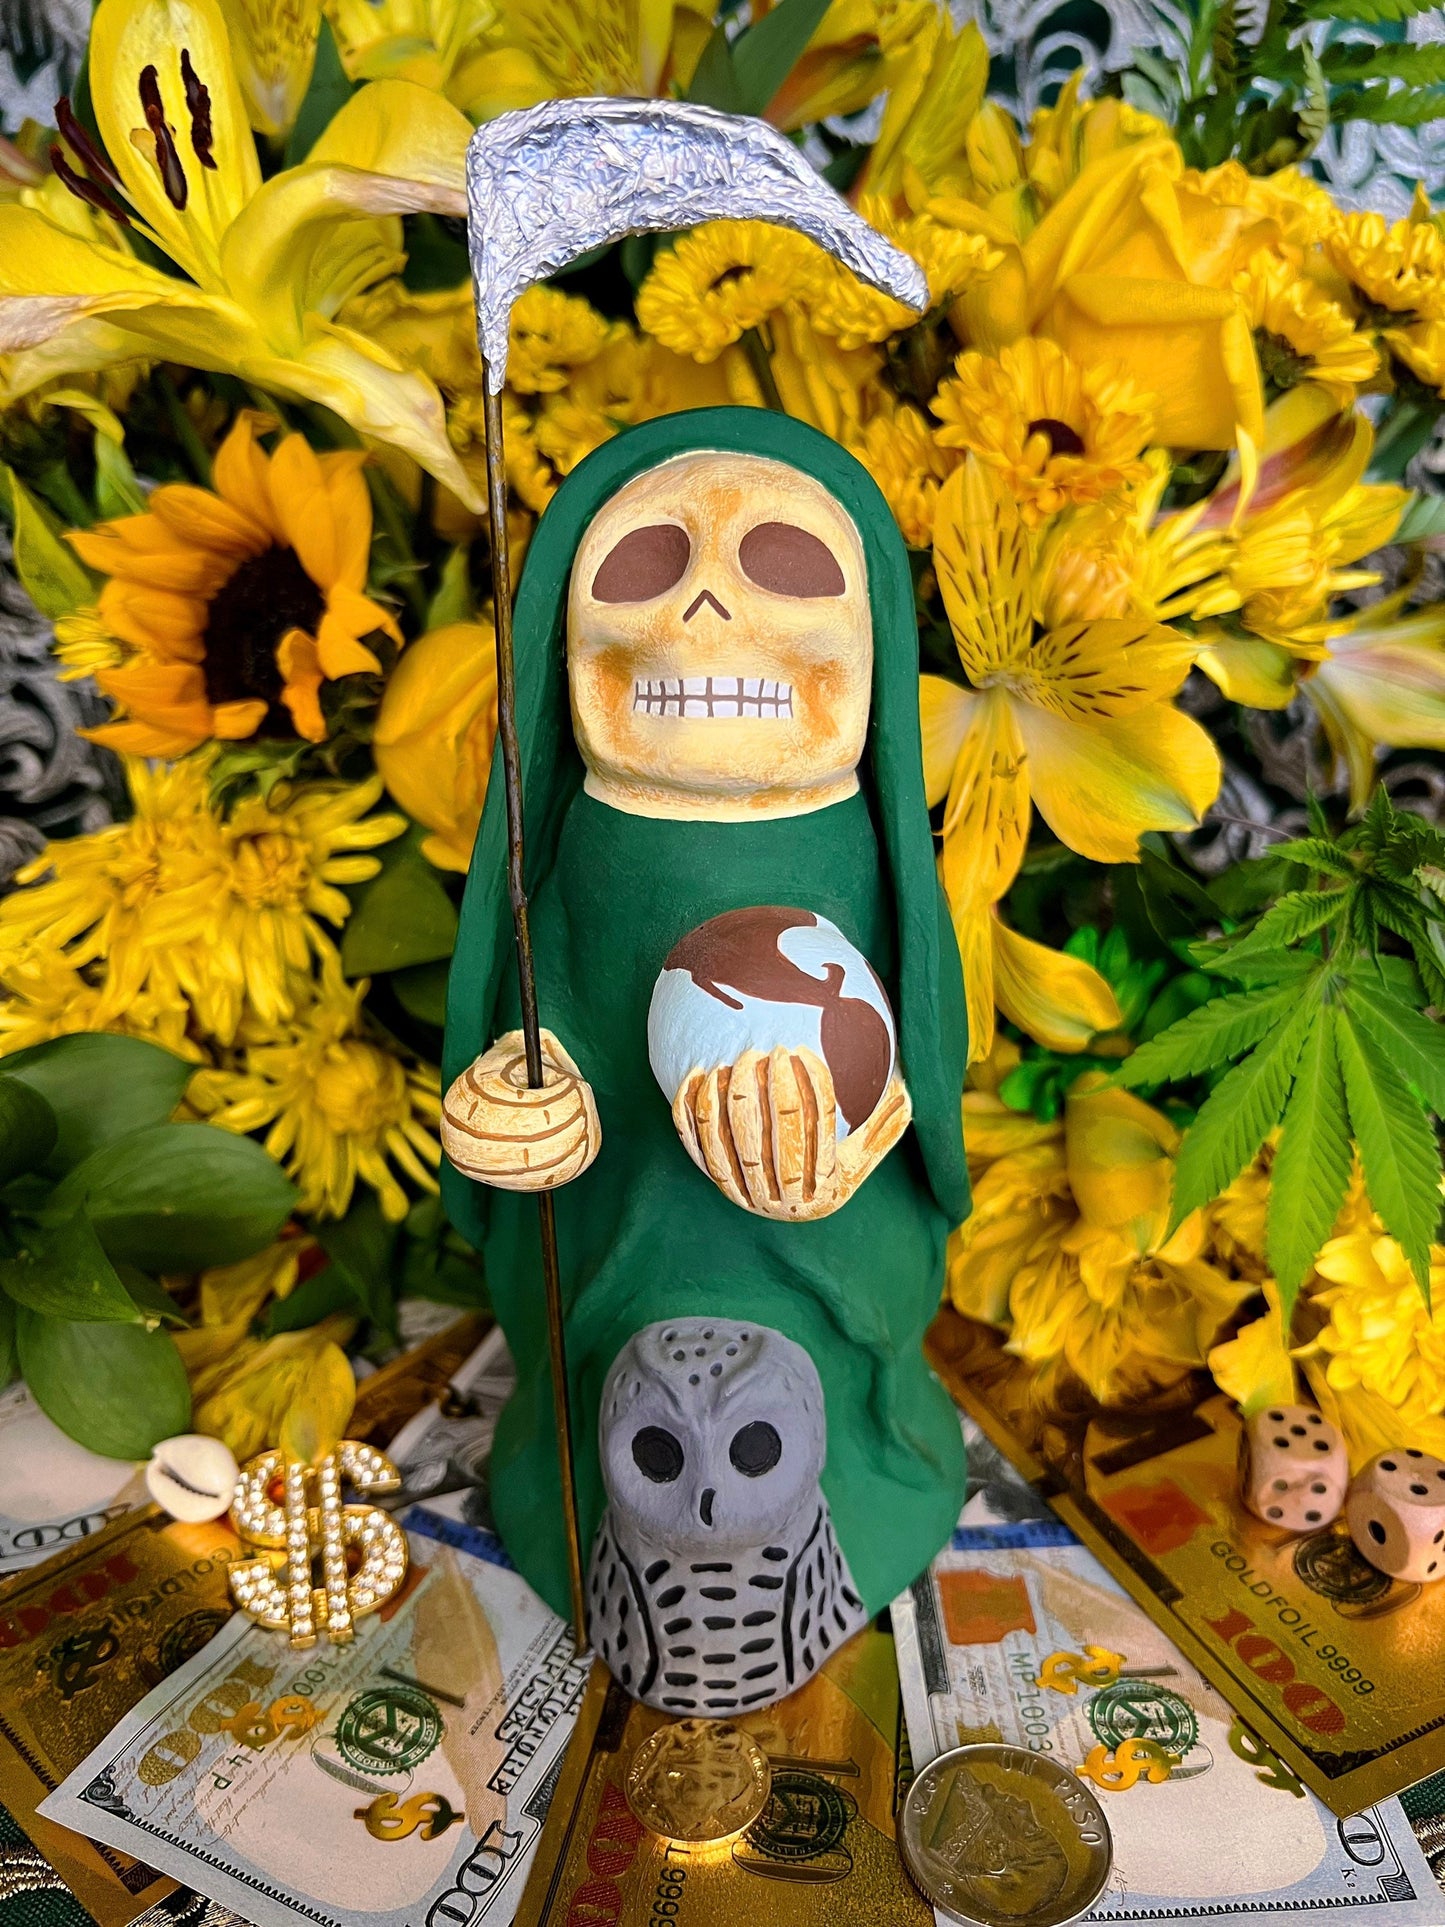 Santa Muerte Verde Statue + Green + Mictecacihuatl + Mictlantecihuatl + Traditionally Handcrafted from Mexican Clay + One of a Kind